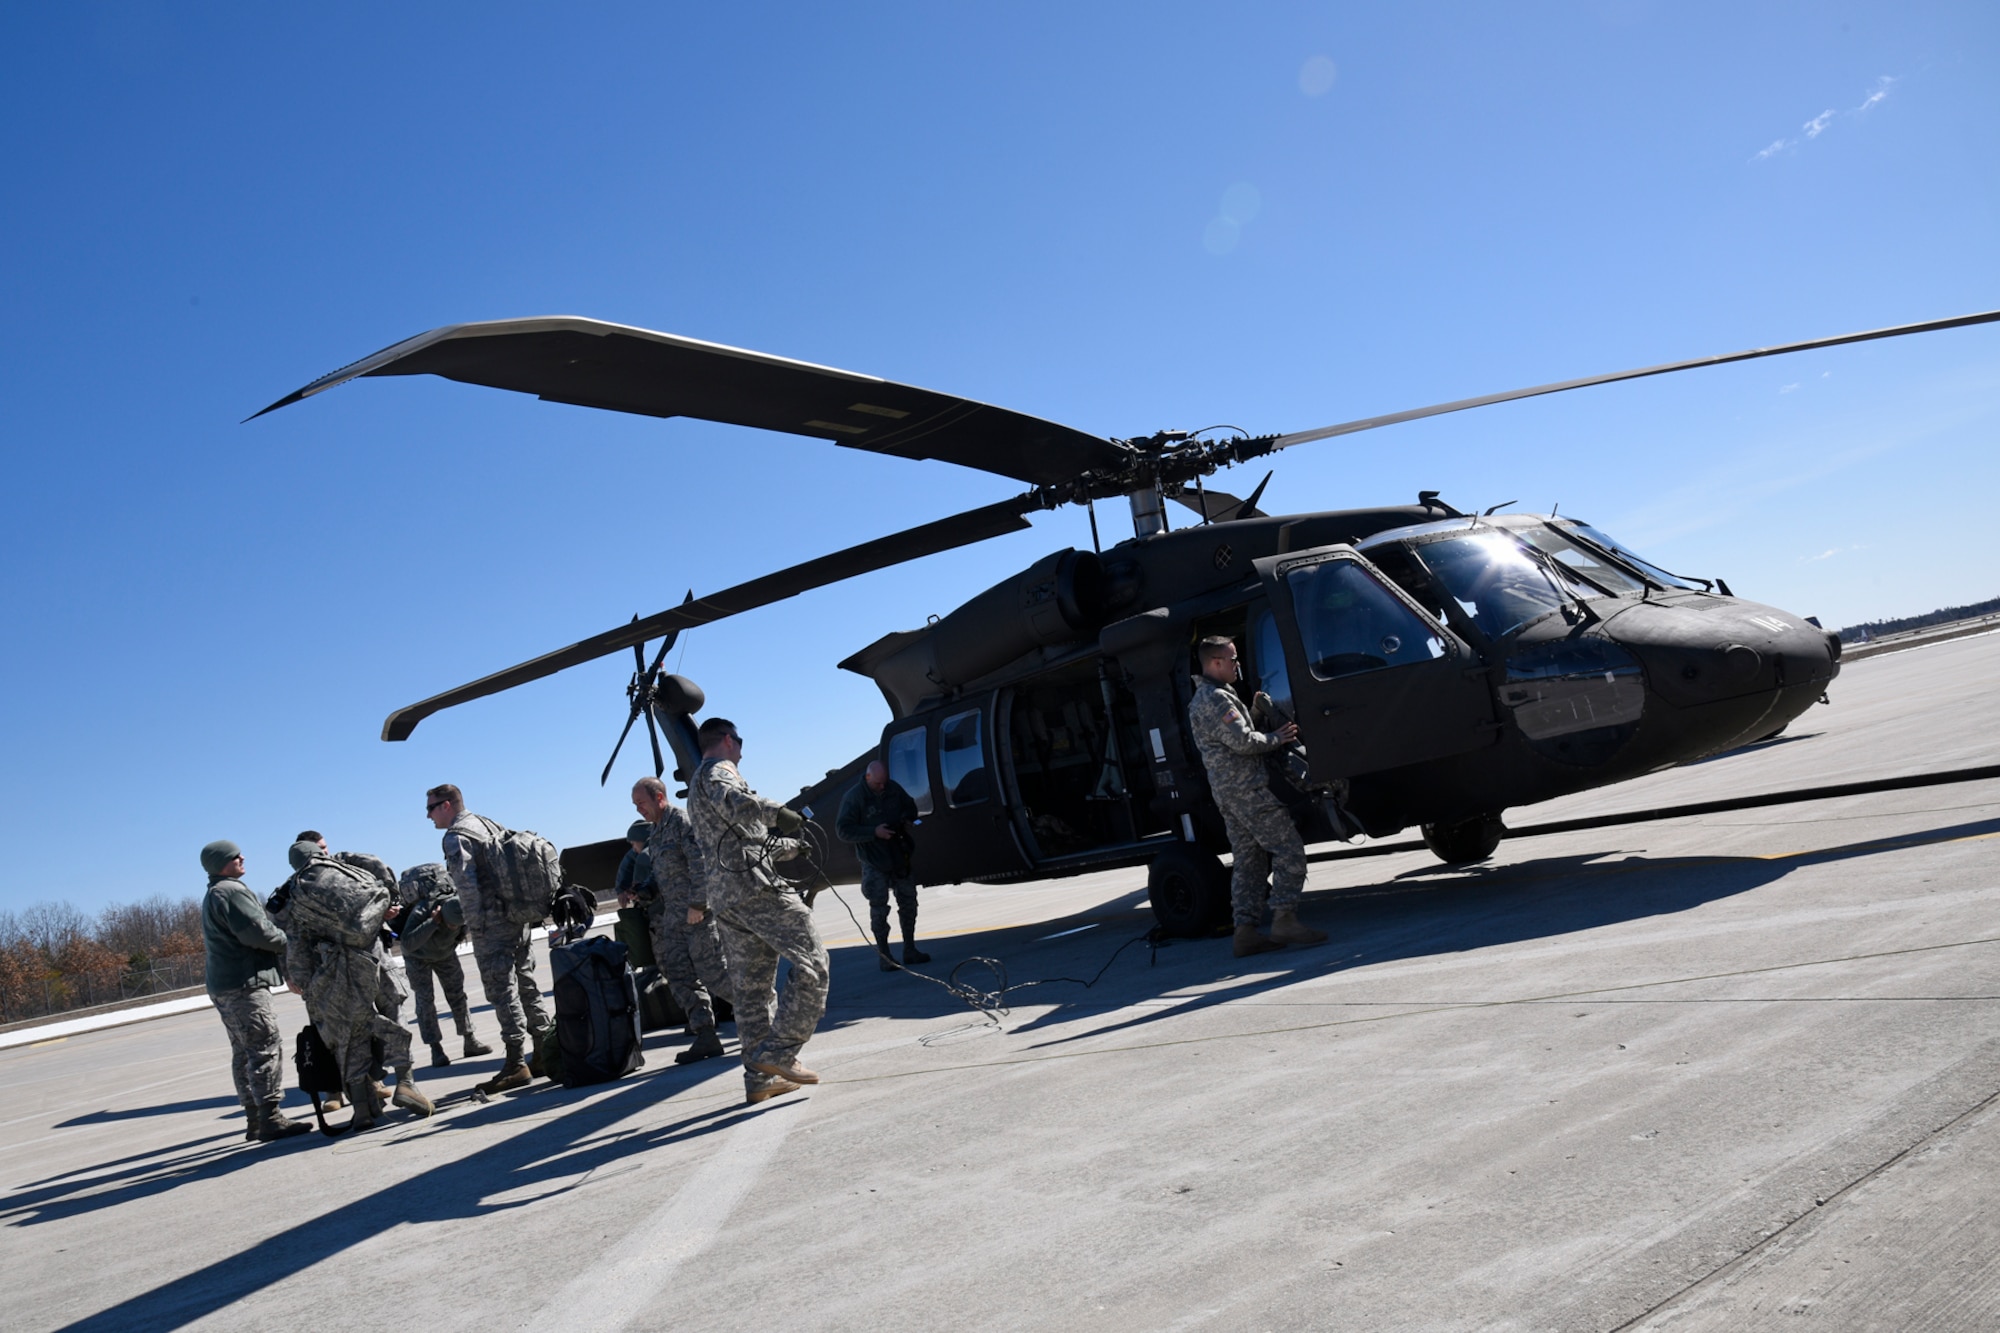 Members of the 127th Logistics Readiness Squadron board a UH-60 Black Hawk on the flight line at Selfridge Air National Guard Base, Mich., March 18, 2015. The 127th LRS team is temporarily relocating to support a mobilization exercise of the Michigan Army National Guard’s 119th Field Artillery. (U.S. Air National Guard photo by Senior Airman Ryan Zeski/Released)